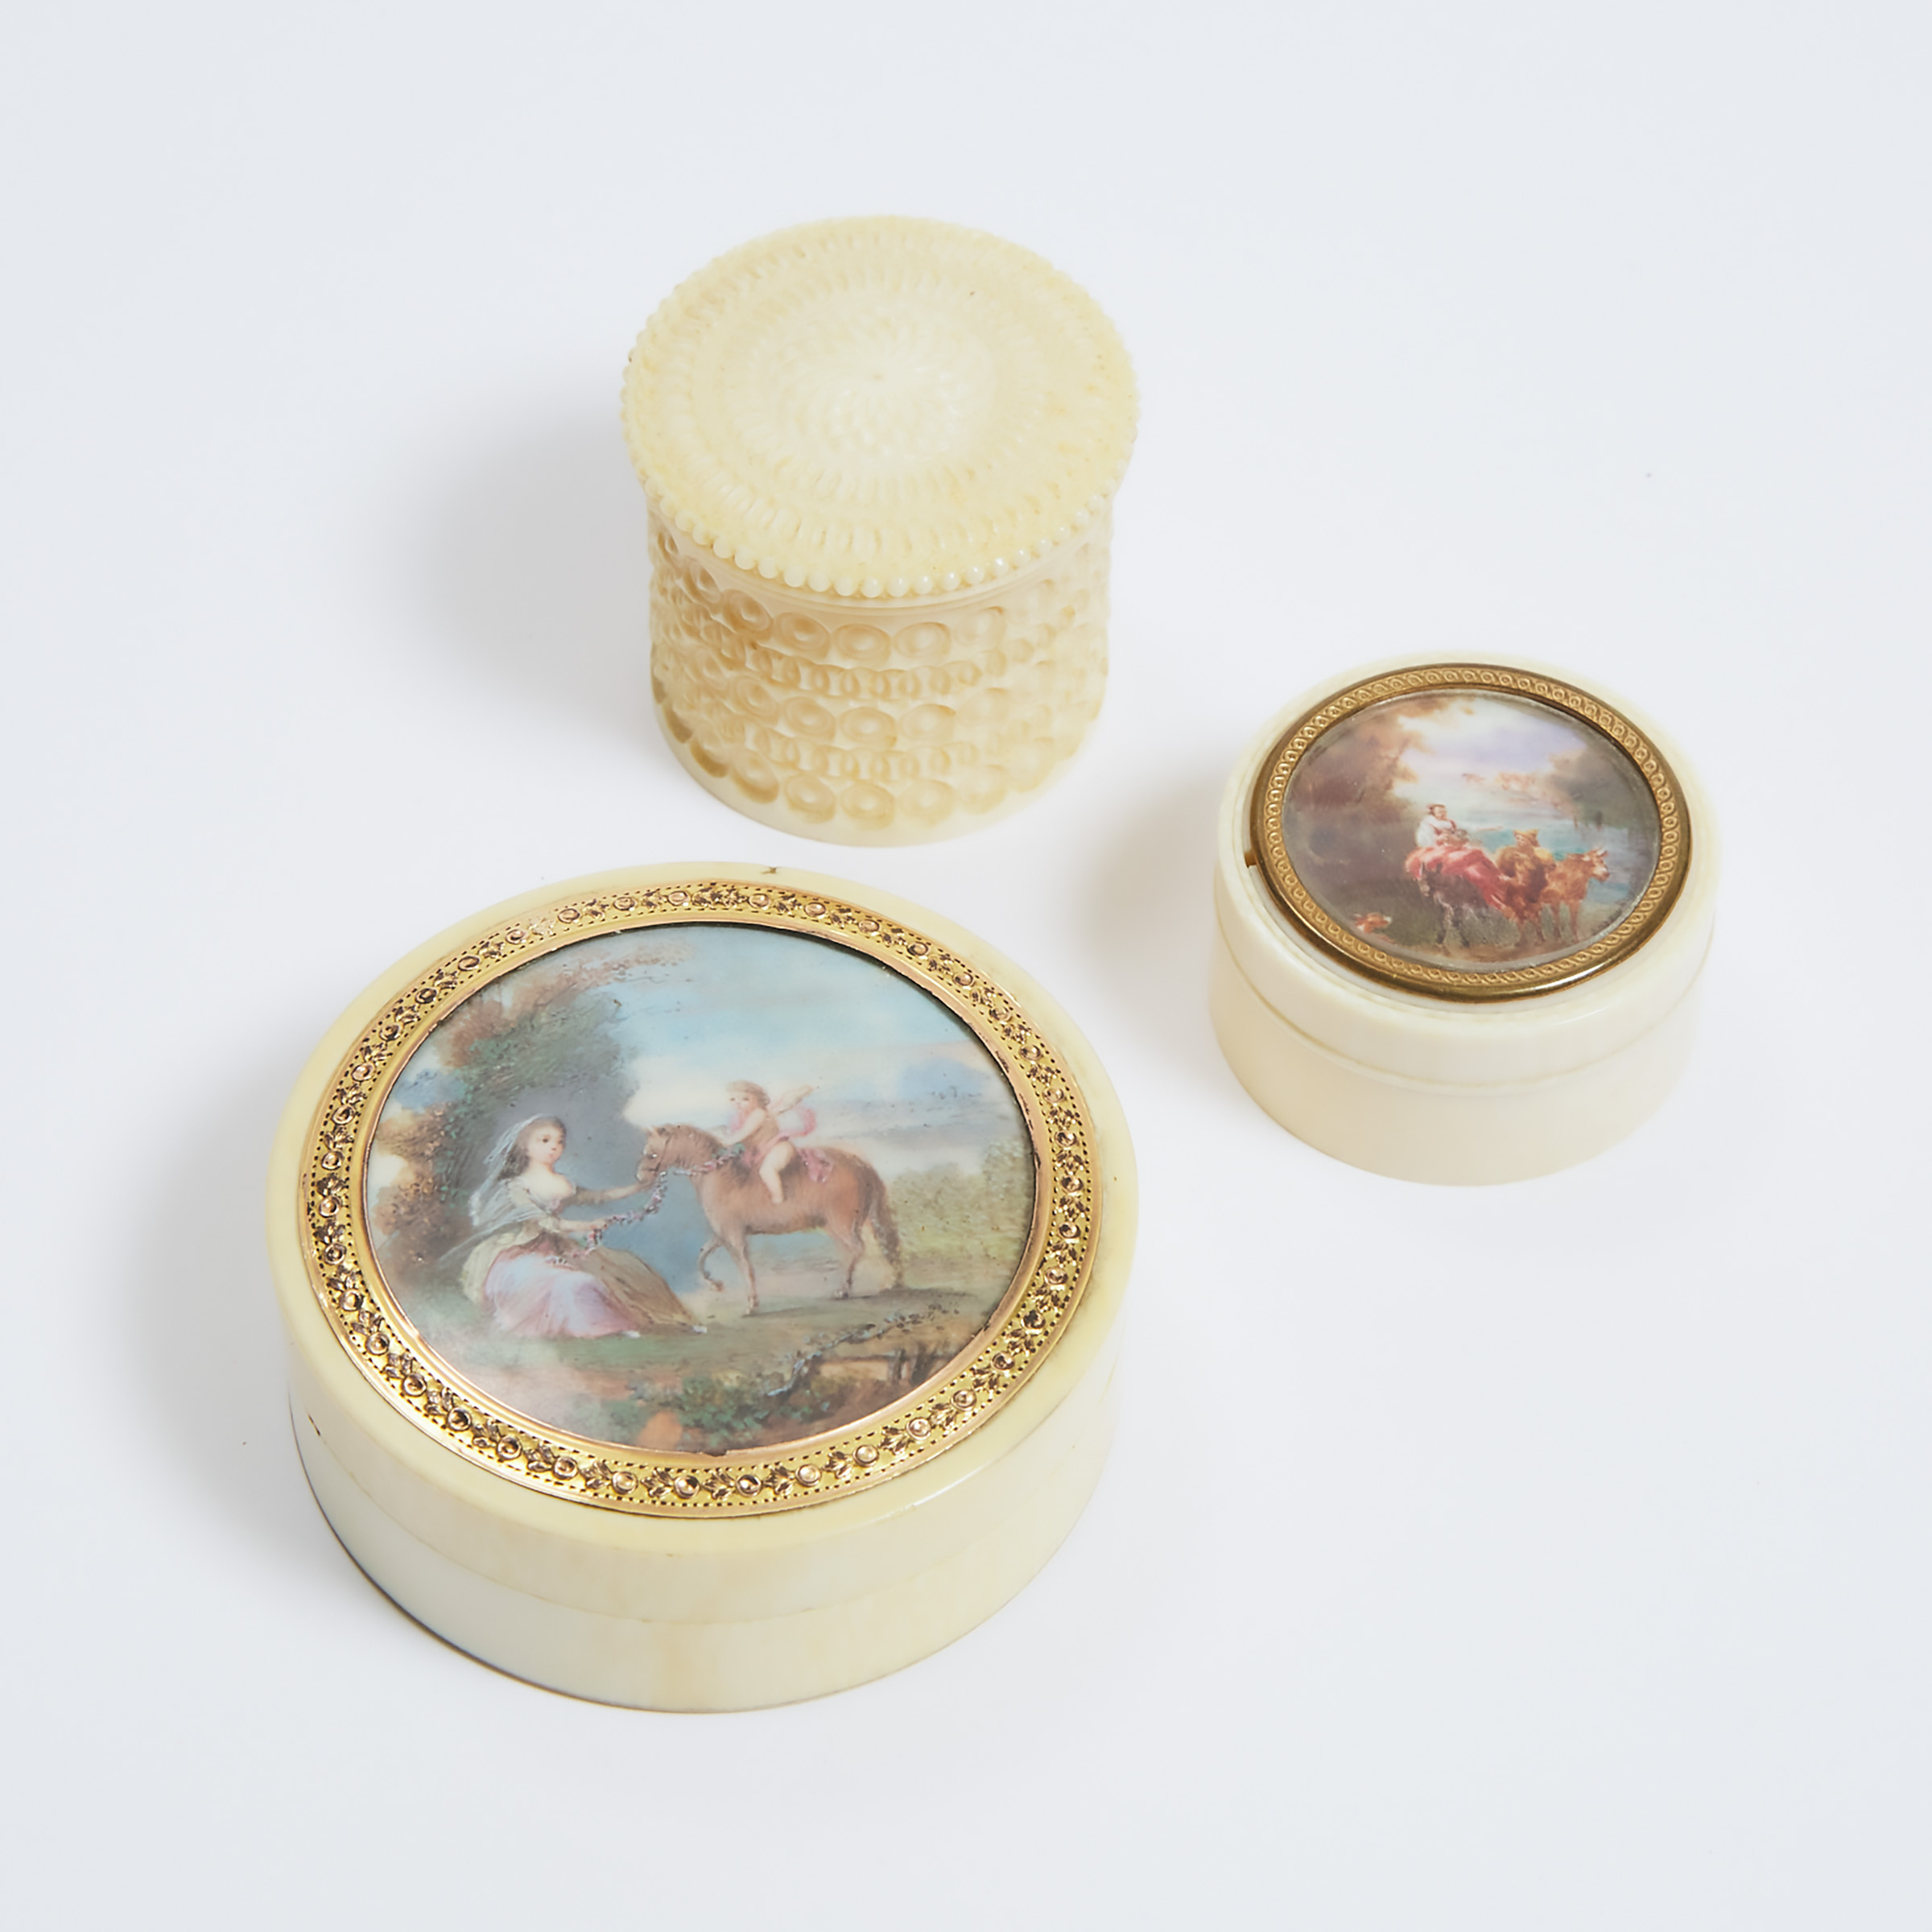 Two Italian Ivory Miniature Pictorial Boxes, 19th/early 20th century